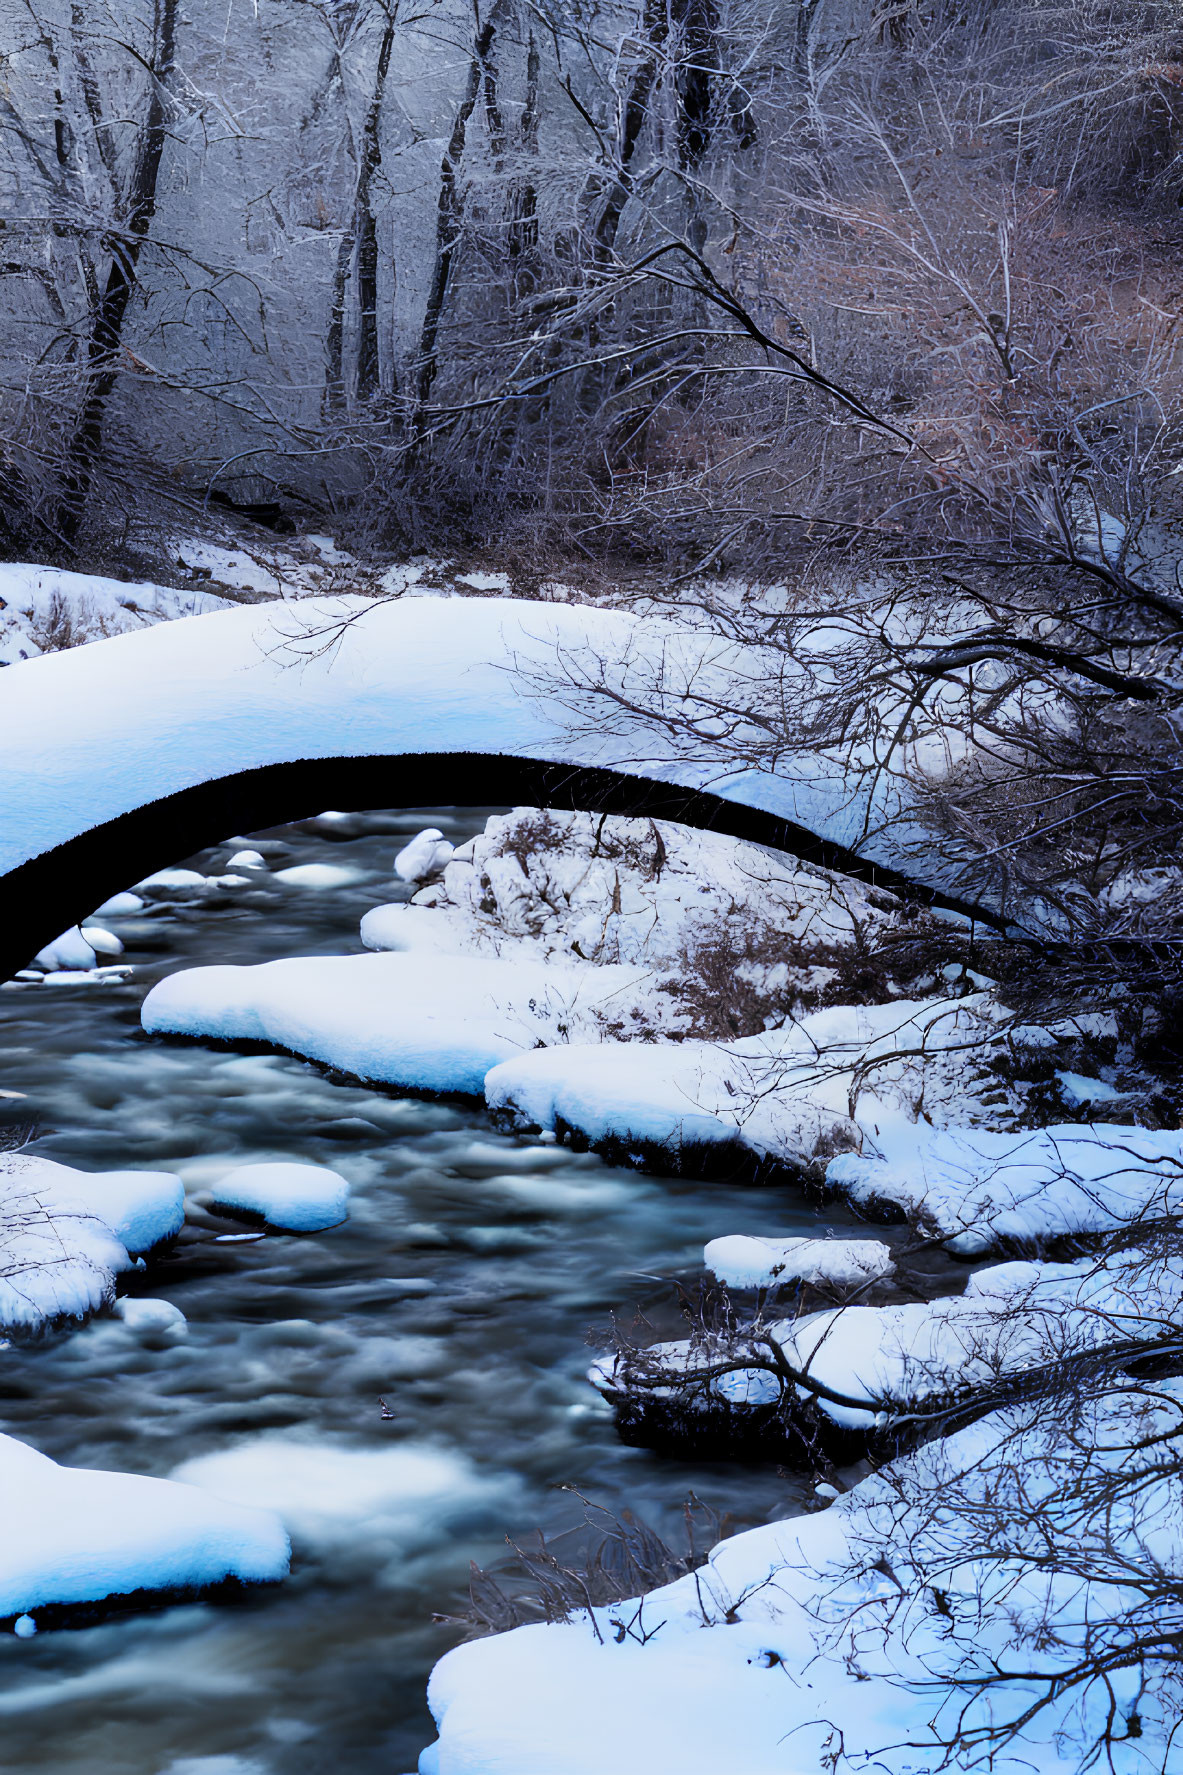 Snow-covered arched stone bridge over gently flowing river in serene winter scene